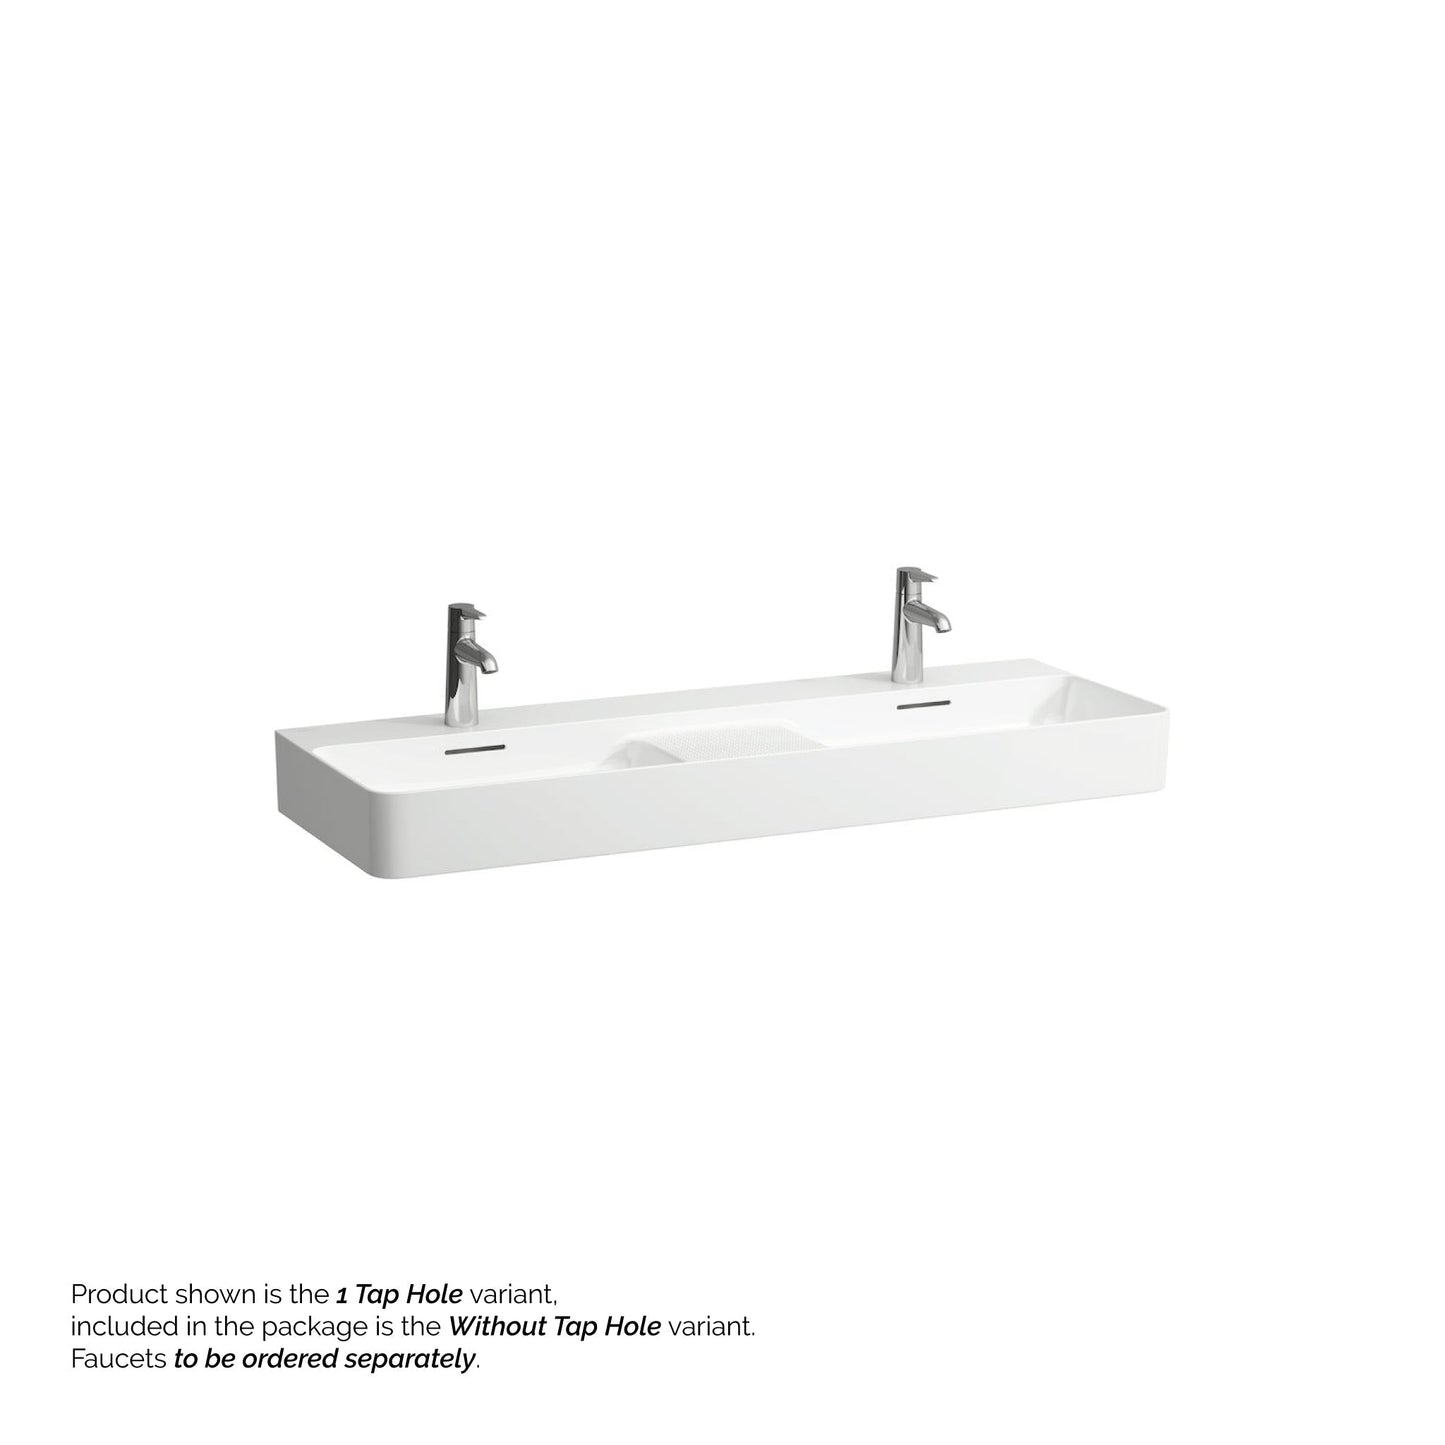 Laufen Val 47" x 17" White Ceramic Wall-Mounted Double Bathroom Sink Without Faucet Hole